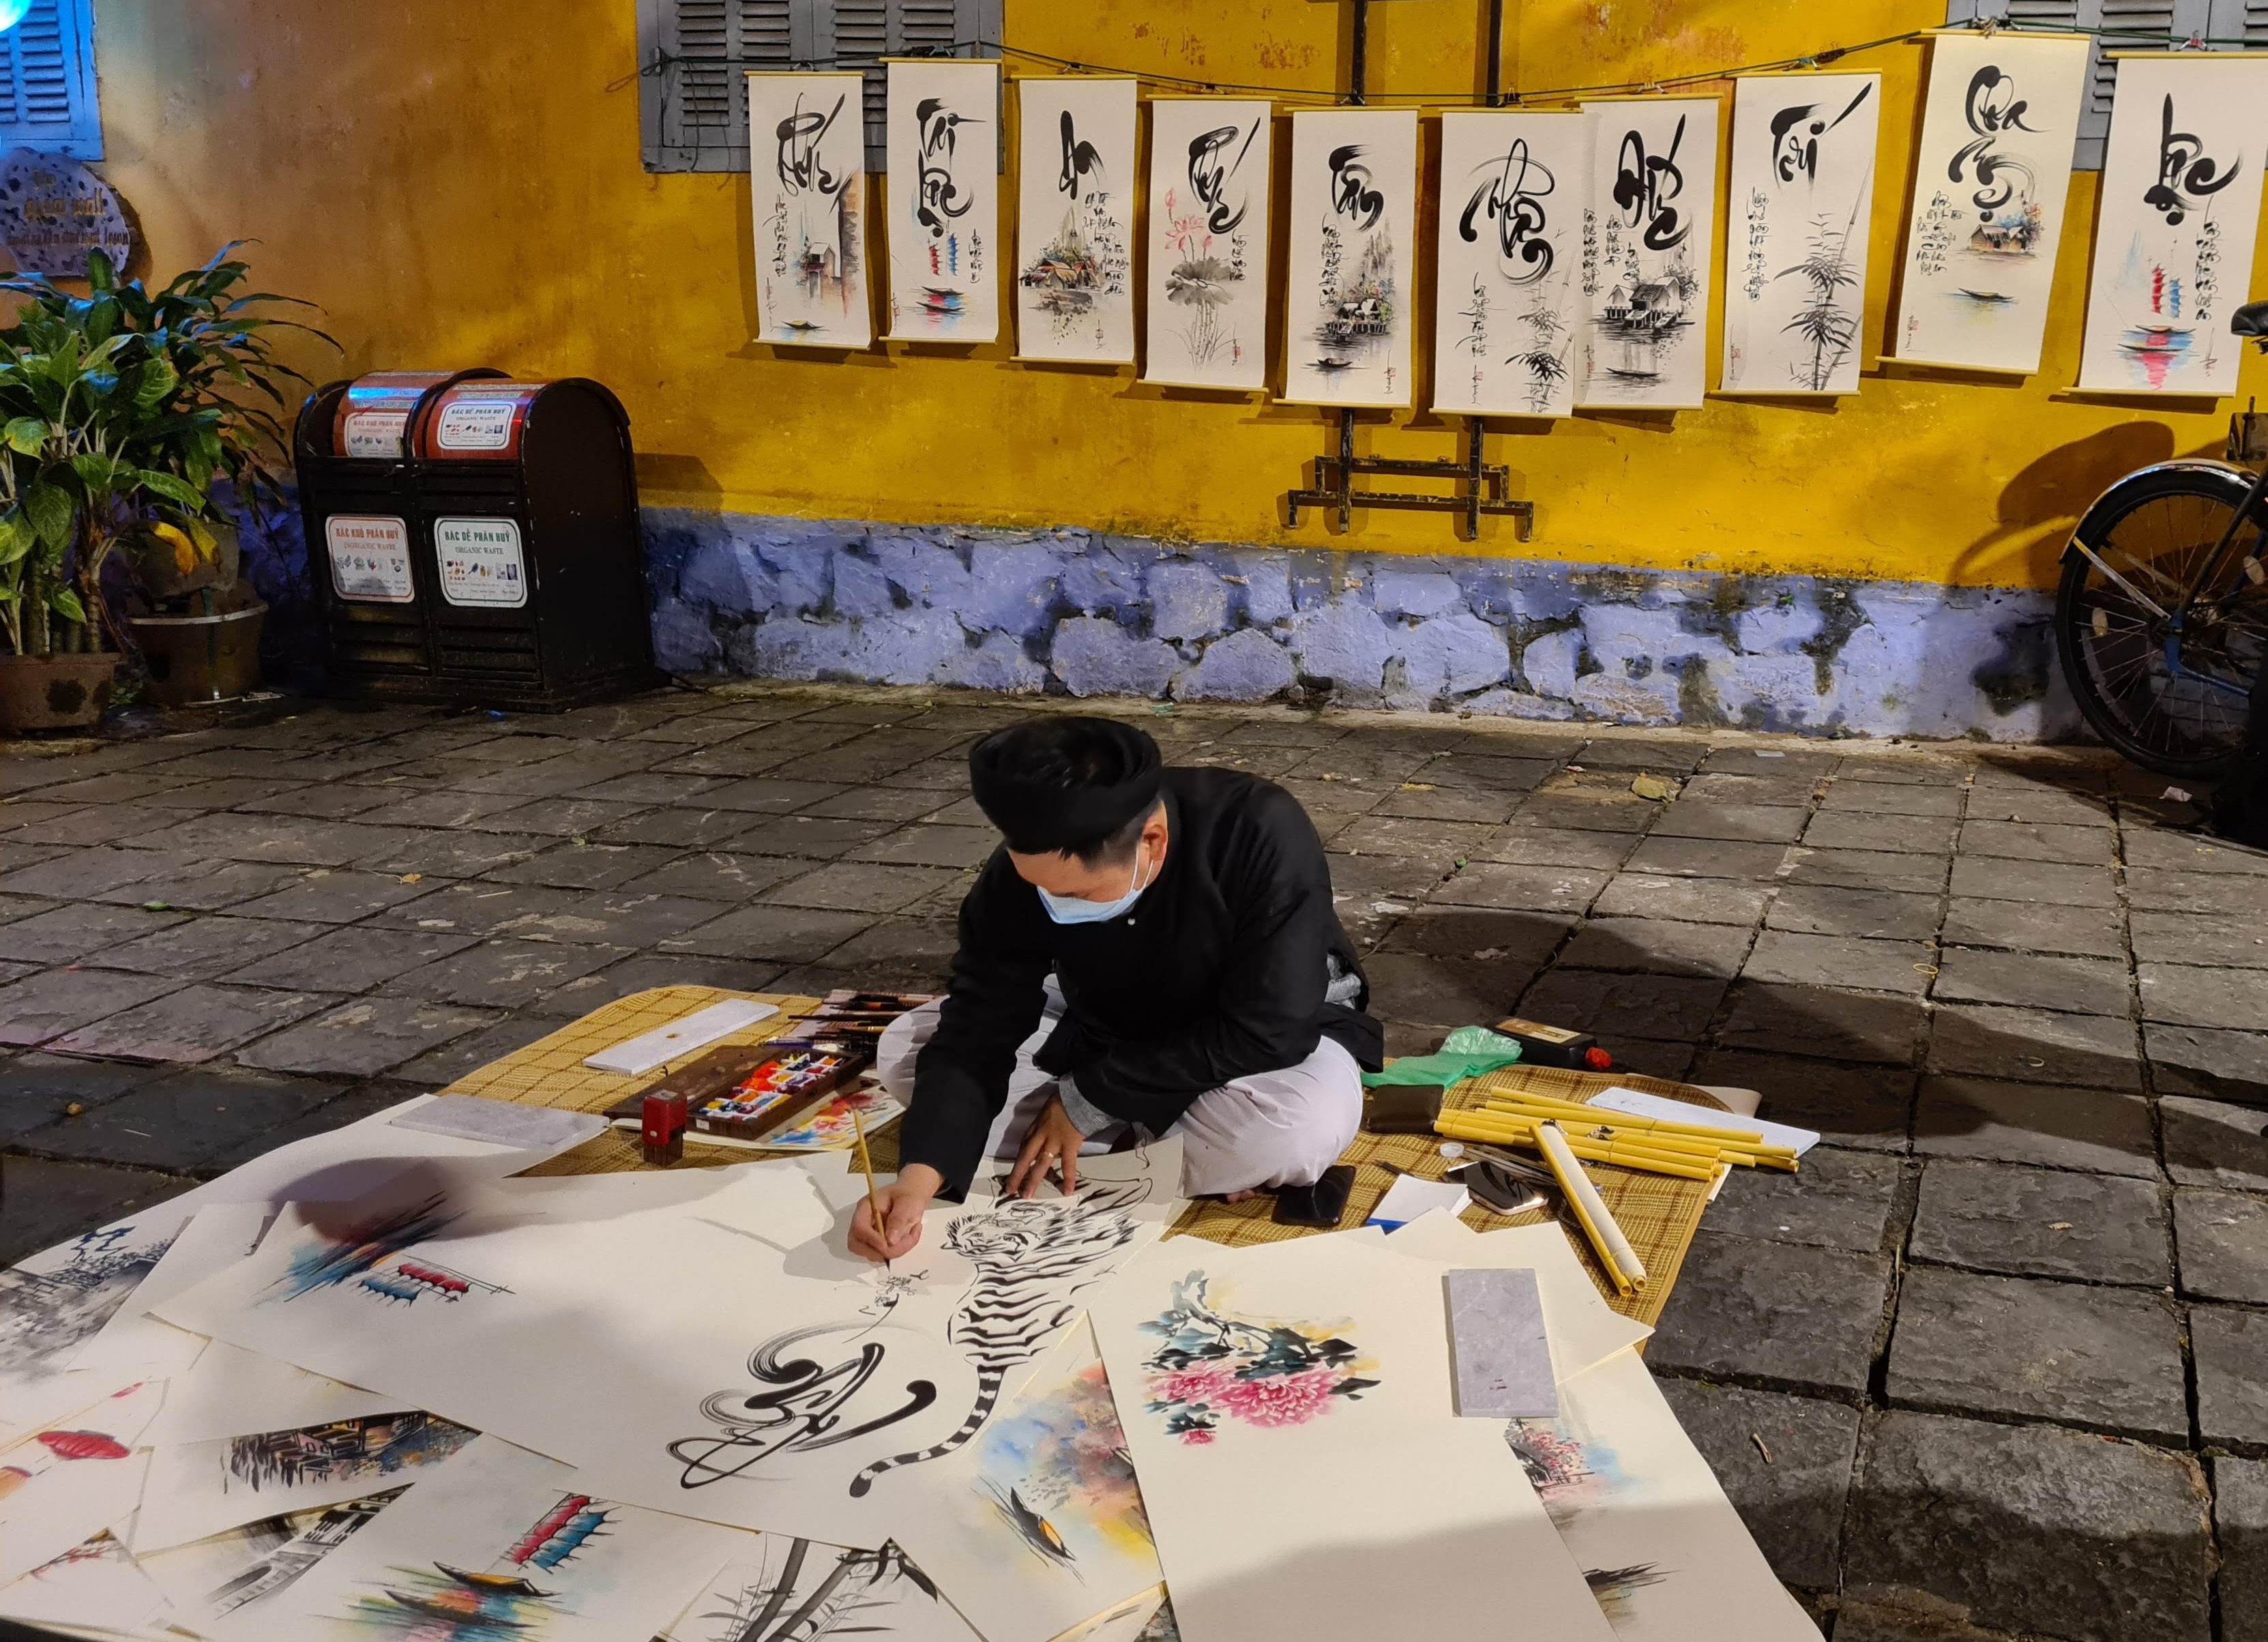 A calligrapher in Hoi An Ancient Town, Quang Nam Province, Vietnam. Photo taken on April 3, 2022. Photo: Duy Khang / Tuoi Tre